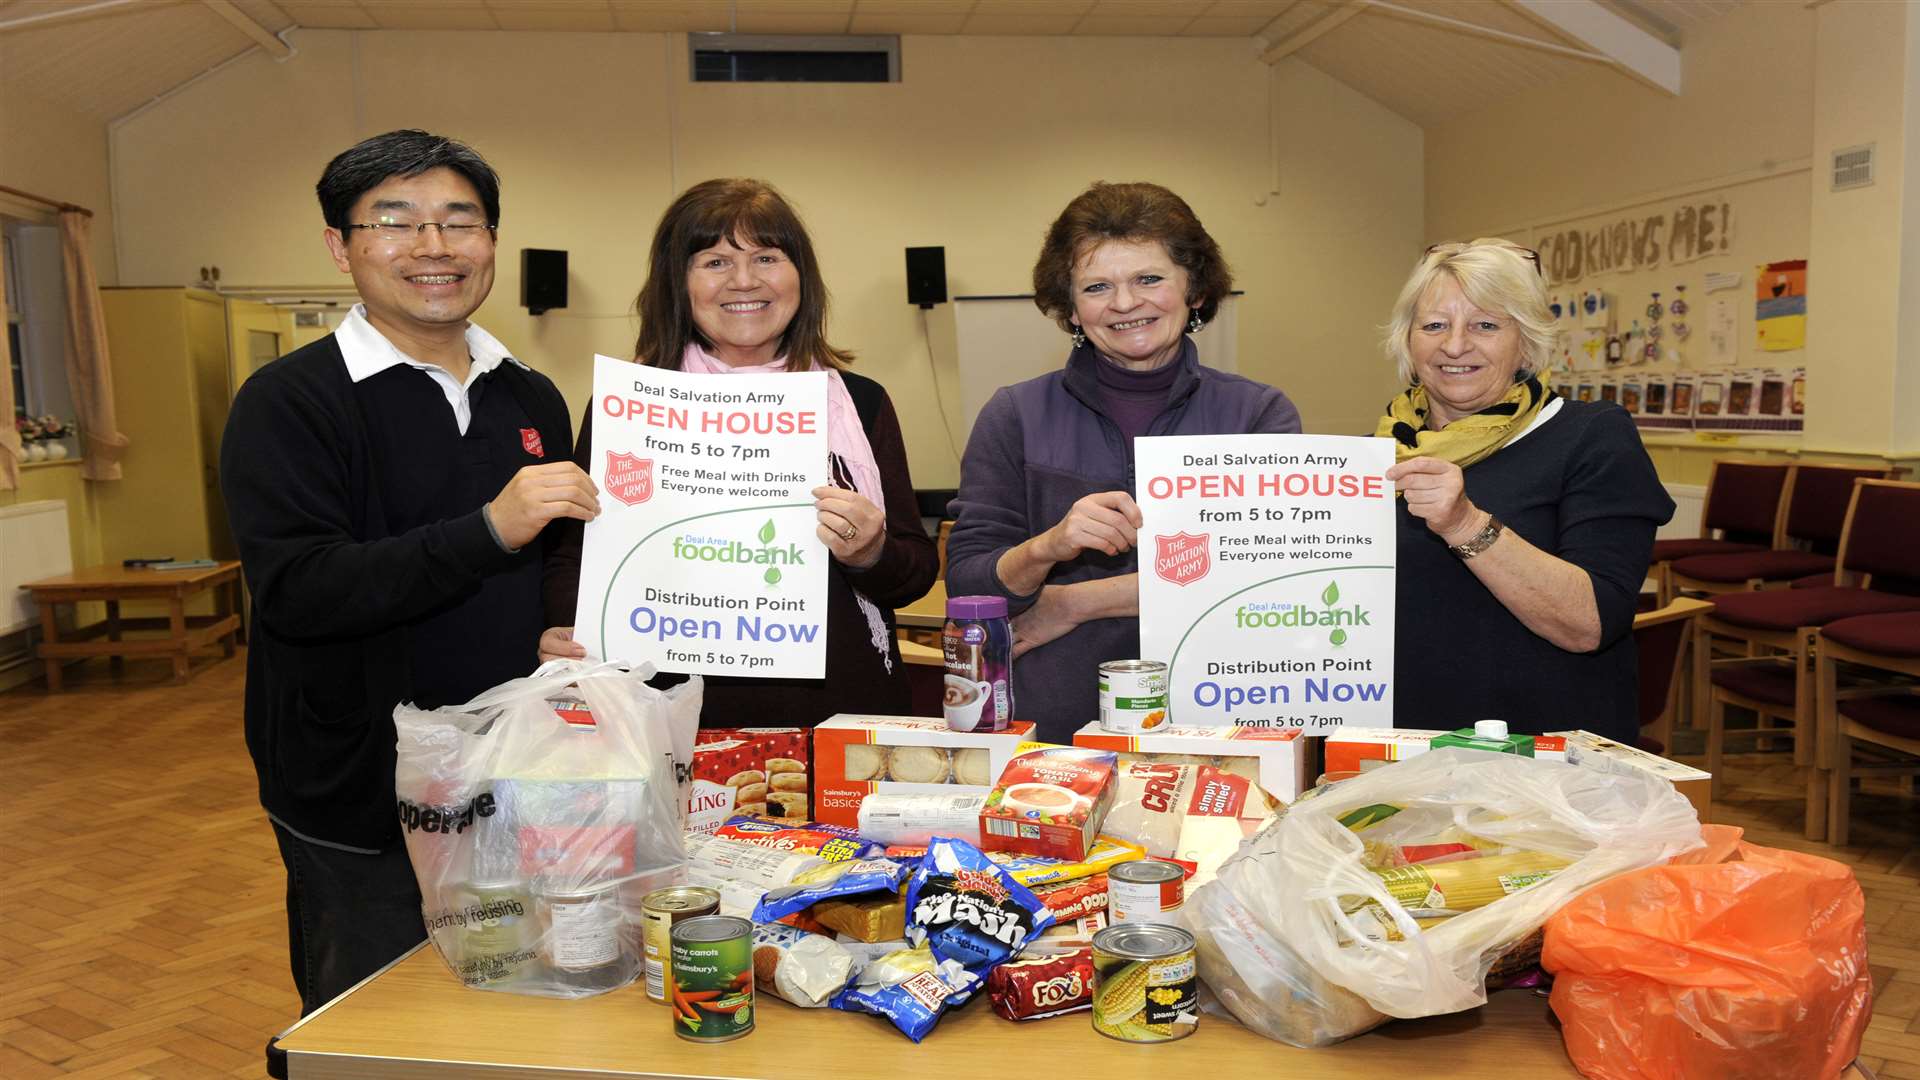 Deal Salvation Army hall. The opening of a Foodbank new outlet in January 2014. Lieutenant Kook Hwan Rho, Shiela Bamford, Shiela Ward and Maureen Parvin are pictured